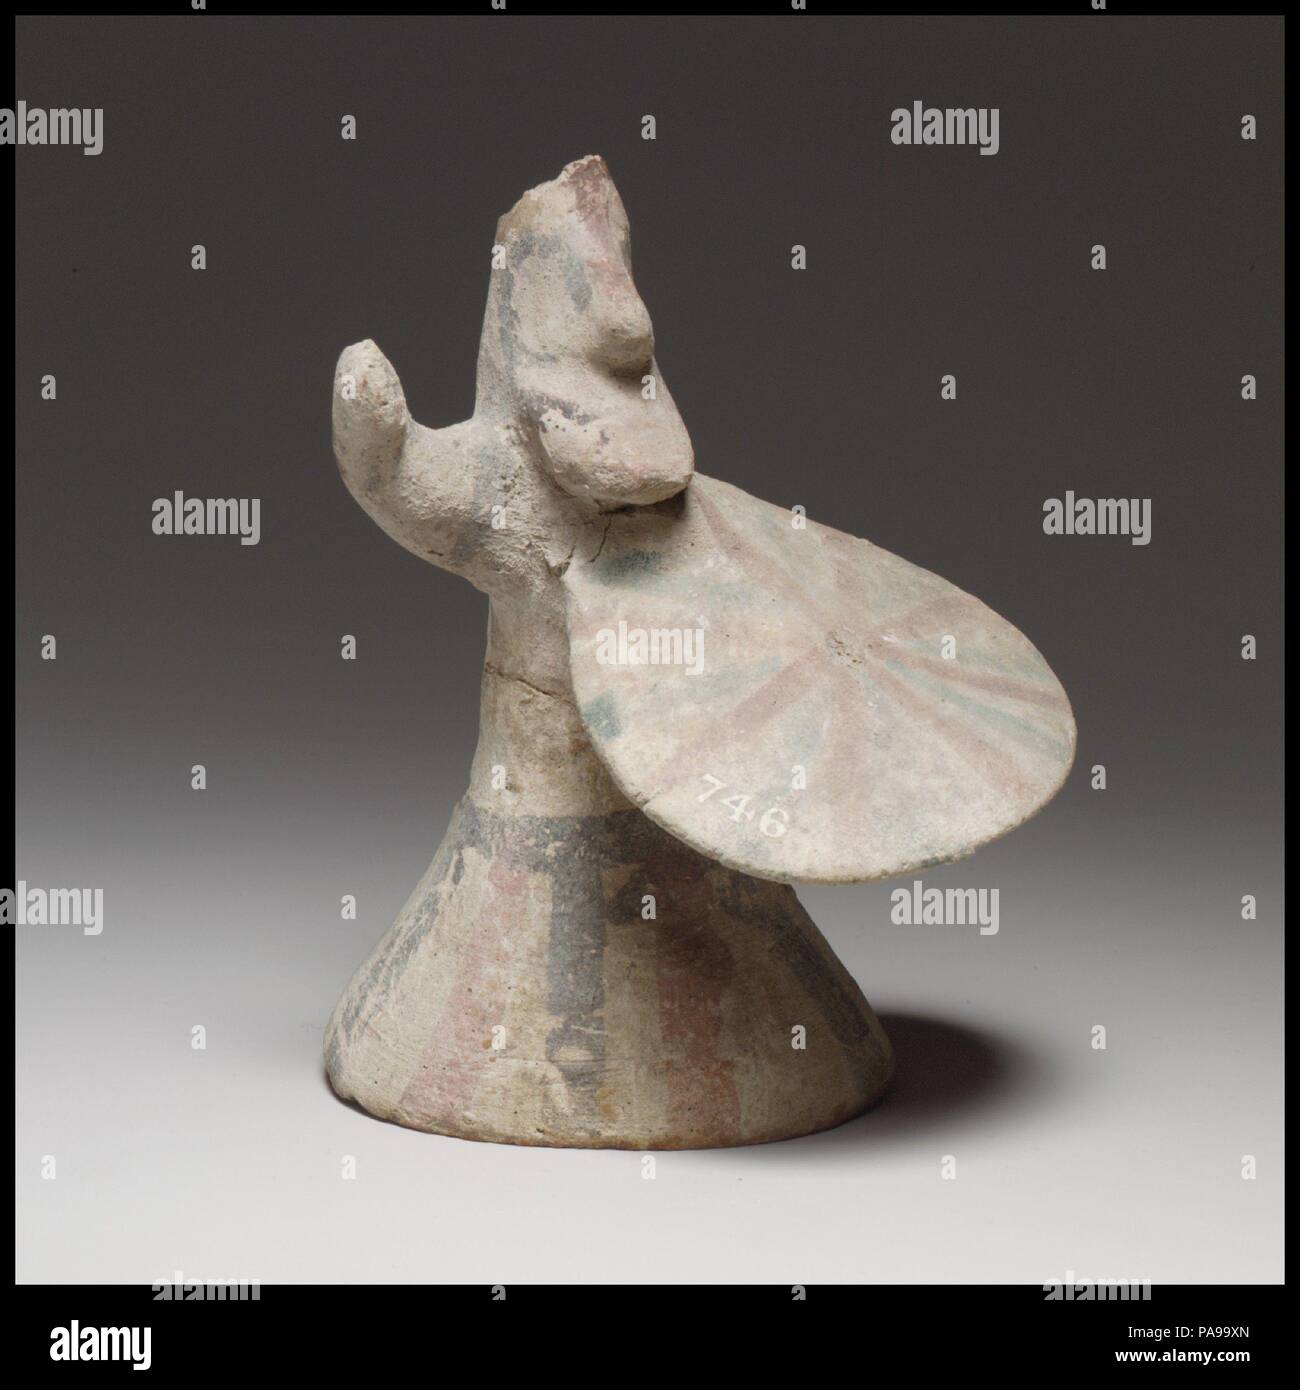 Shield bearer. Culture: Cypriot. Dimensions: H. 4 7/8 in. (12.4 cm). Date: ca. 750-600 B.C..  The lower part of the figurine is wheel-made, hollow, and bell-shaped; the upper body and the head are handmade. There is a perforation at either side of the waist for the attachment of movable legs. Museum: Metropolitan Museum of Art, New York, USA. Stock Photo